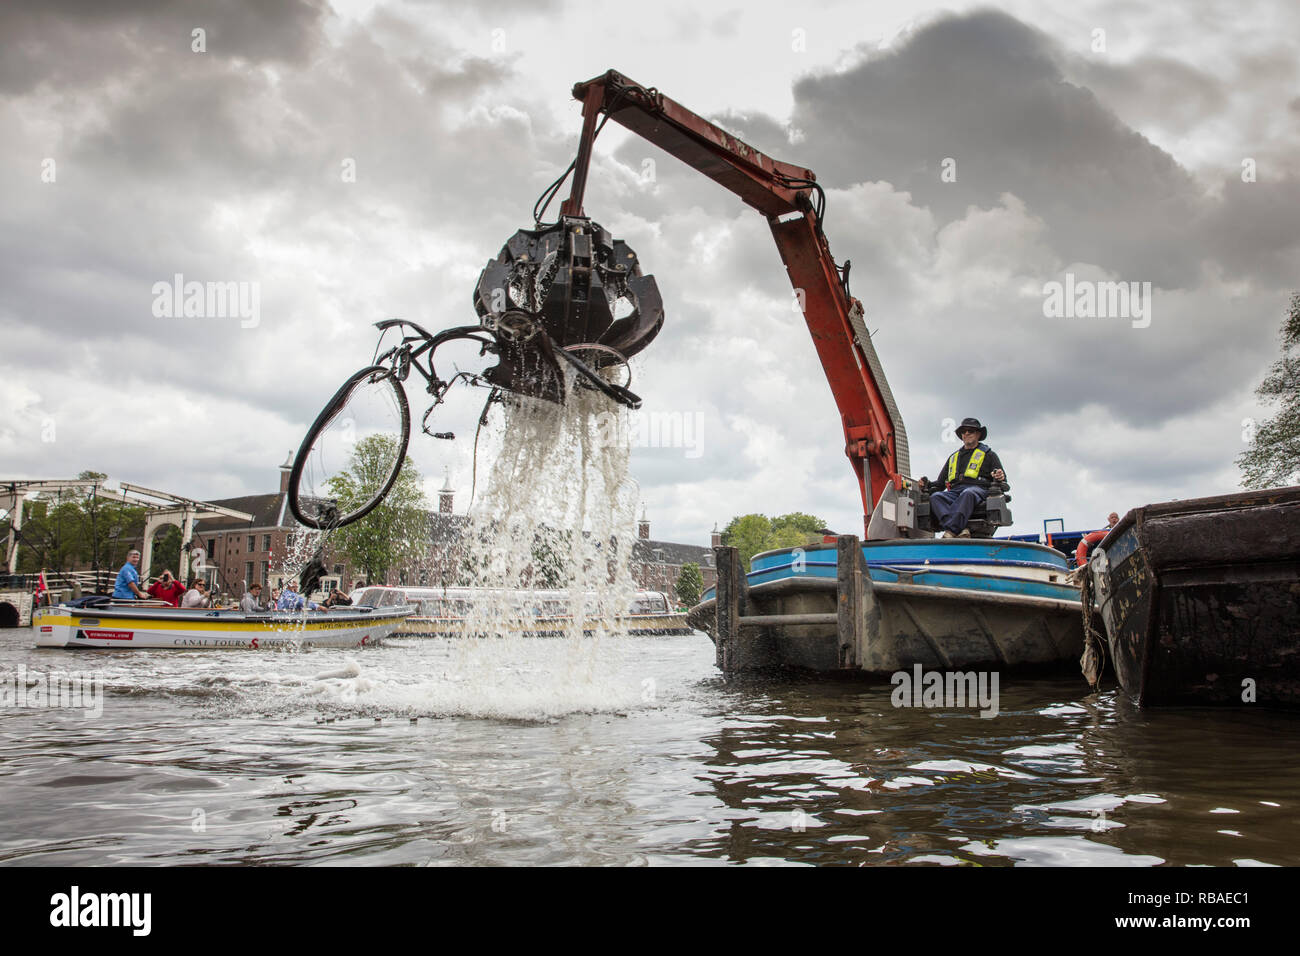 The Netherlands, Amsterdam, Old abandoned bicycles picked up from the Amstel River. Stock Photo